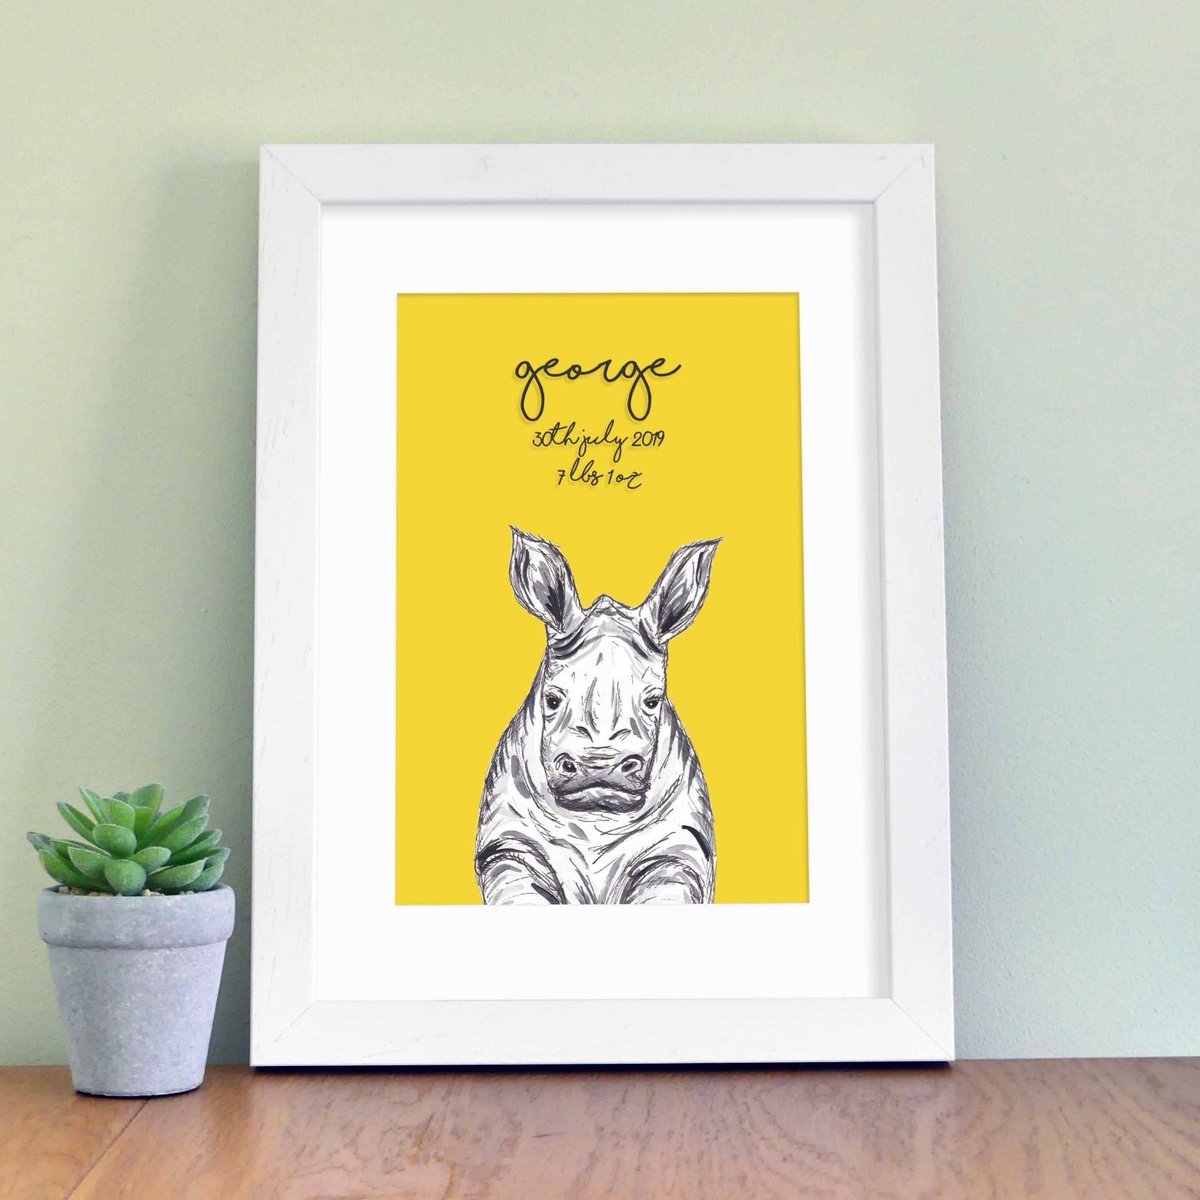 Nearly ready to launch some new drawings. Here's my Rhino which will be part of a set of four safari animals. Remember all my prints can be personalised!  #personalisedprints #nurserydecor #babybedroom #babyrhino #artprints #carolinerolesdesign #carolinesdesigns #tuesdaytease